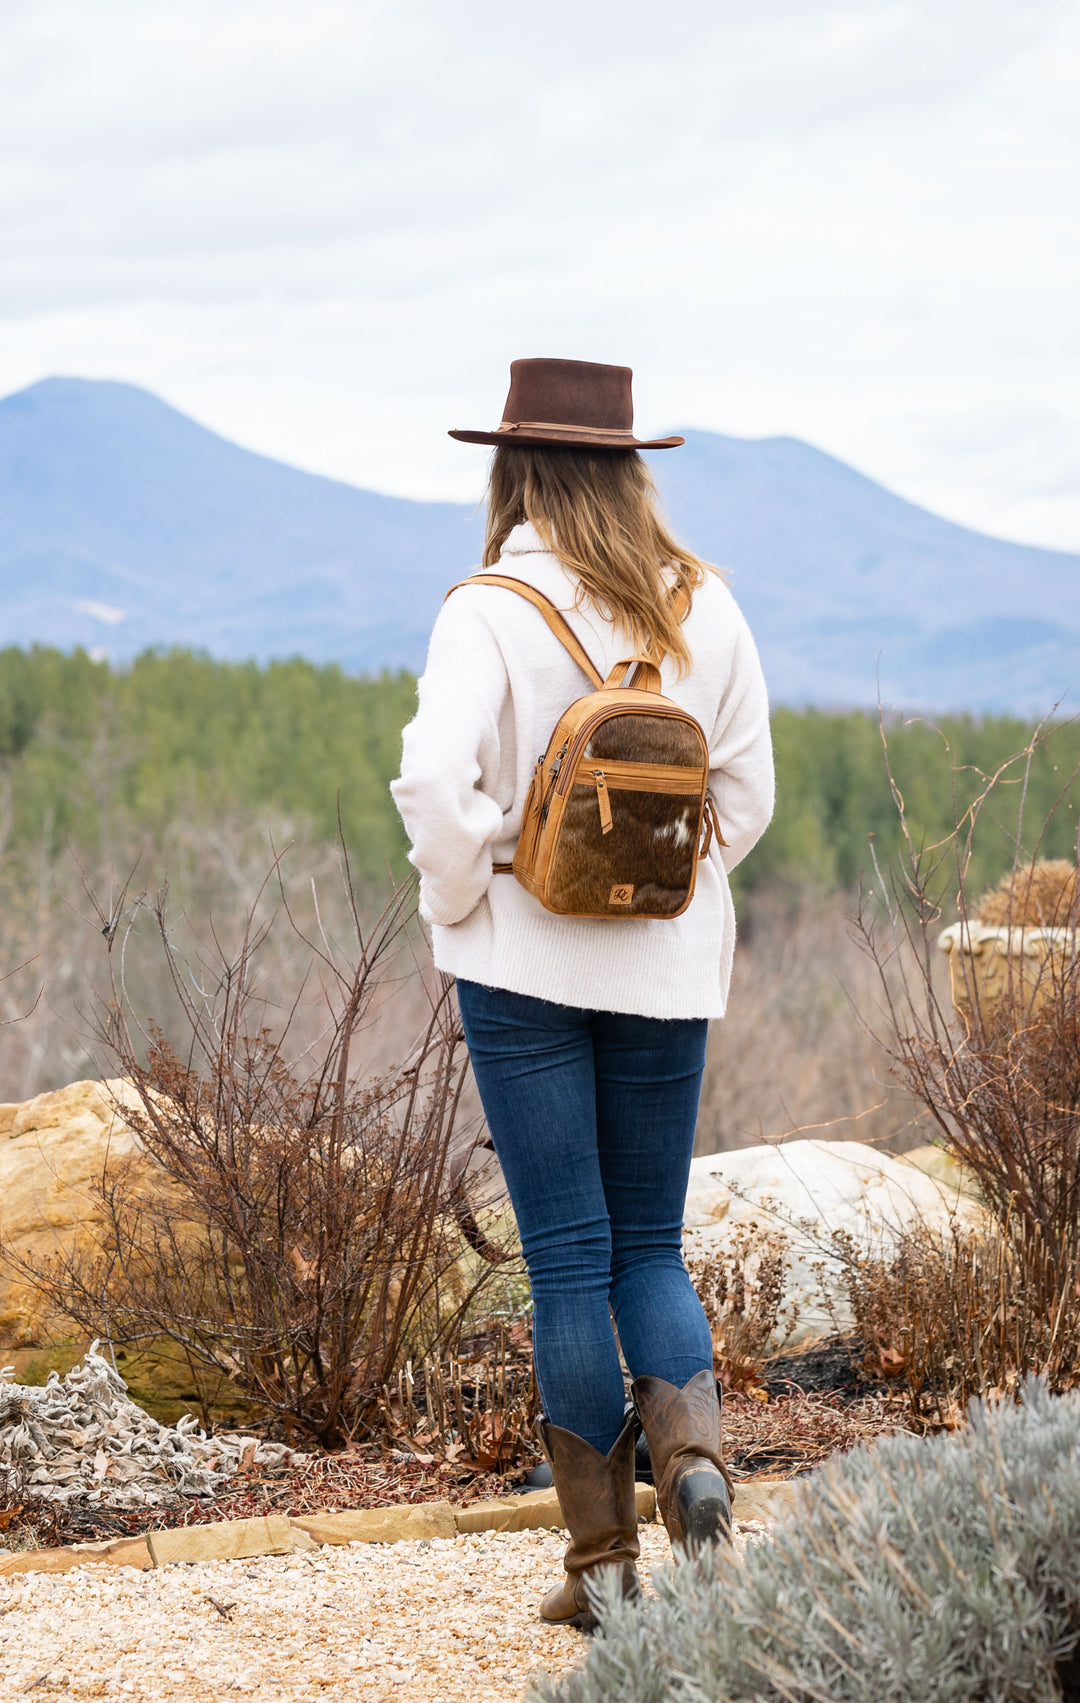 Daisy, Leather Concealed Carry Backpack or Sling